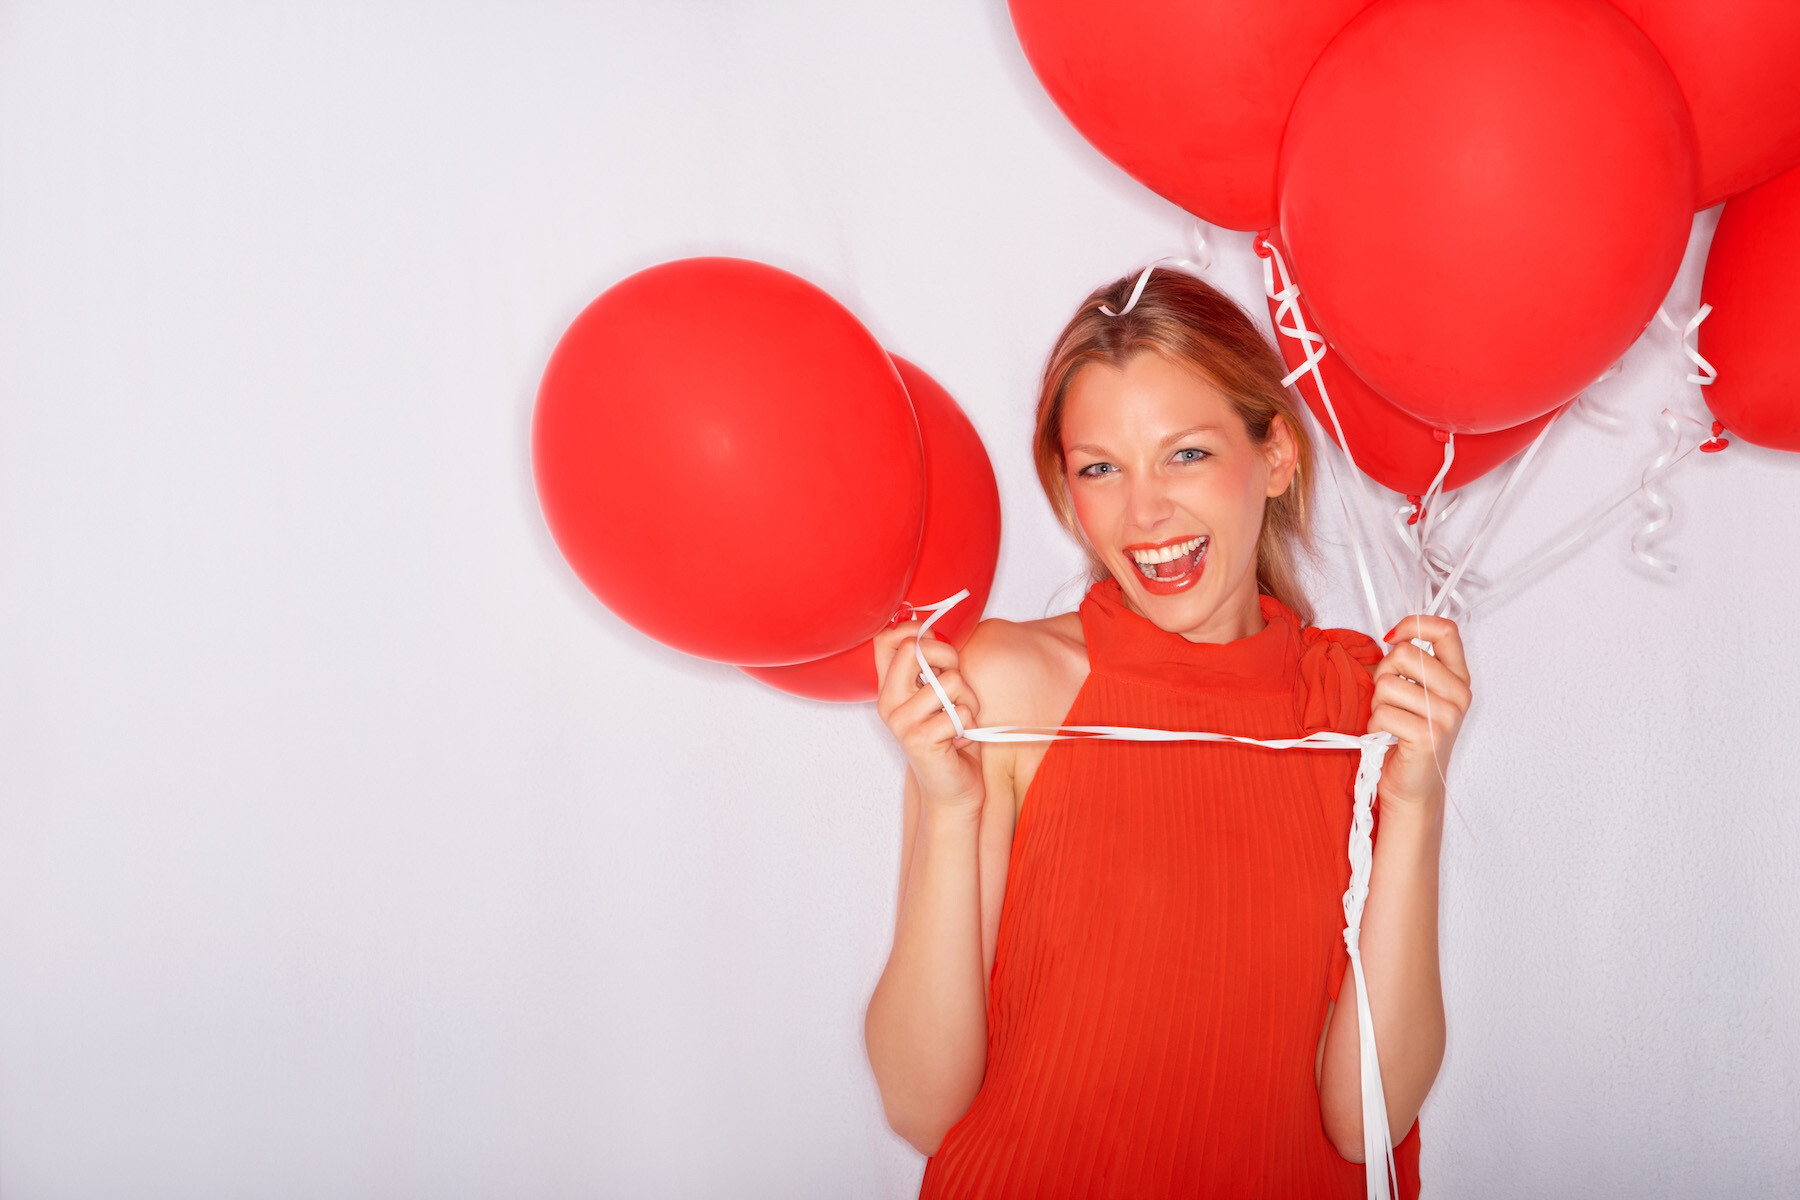 Excited esthetician woman holding red balloons